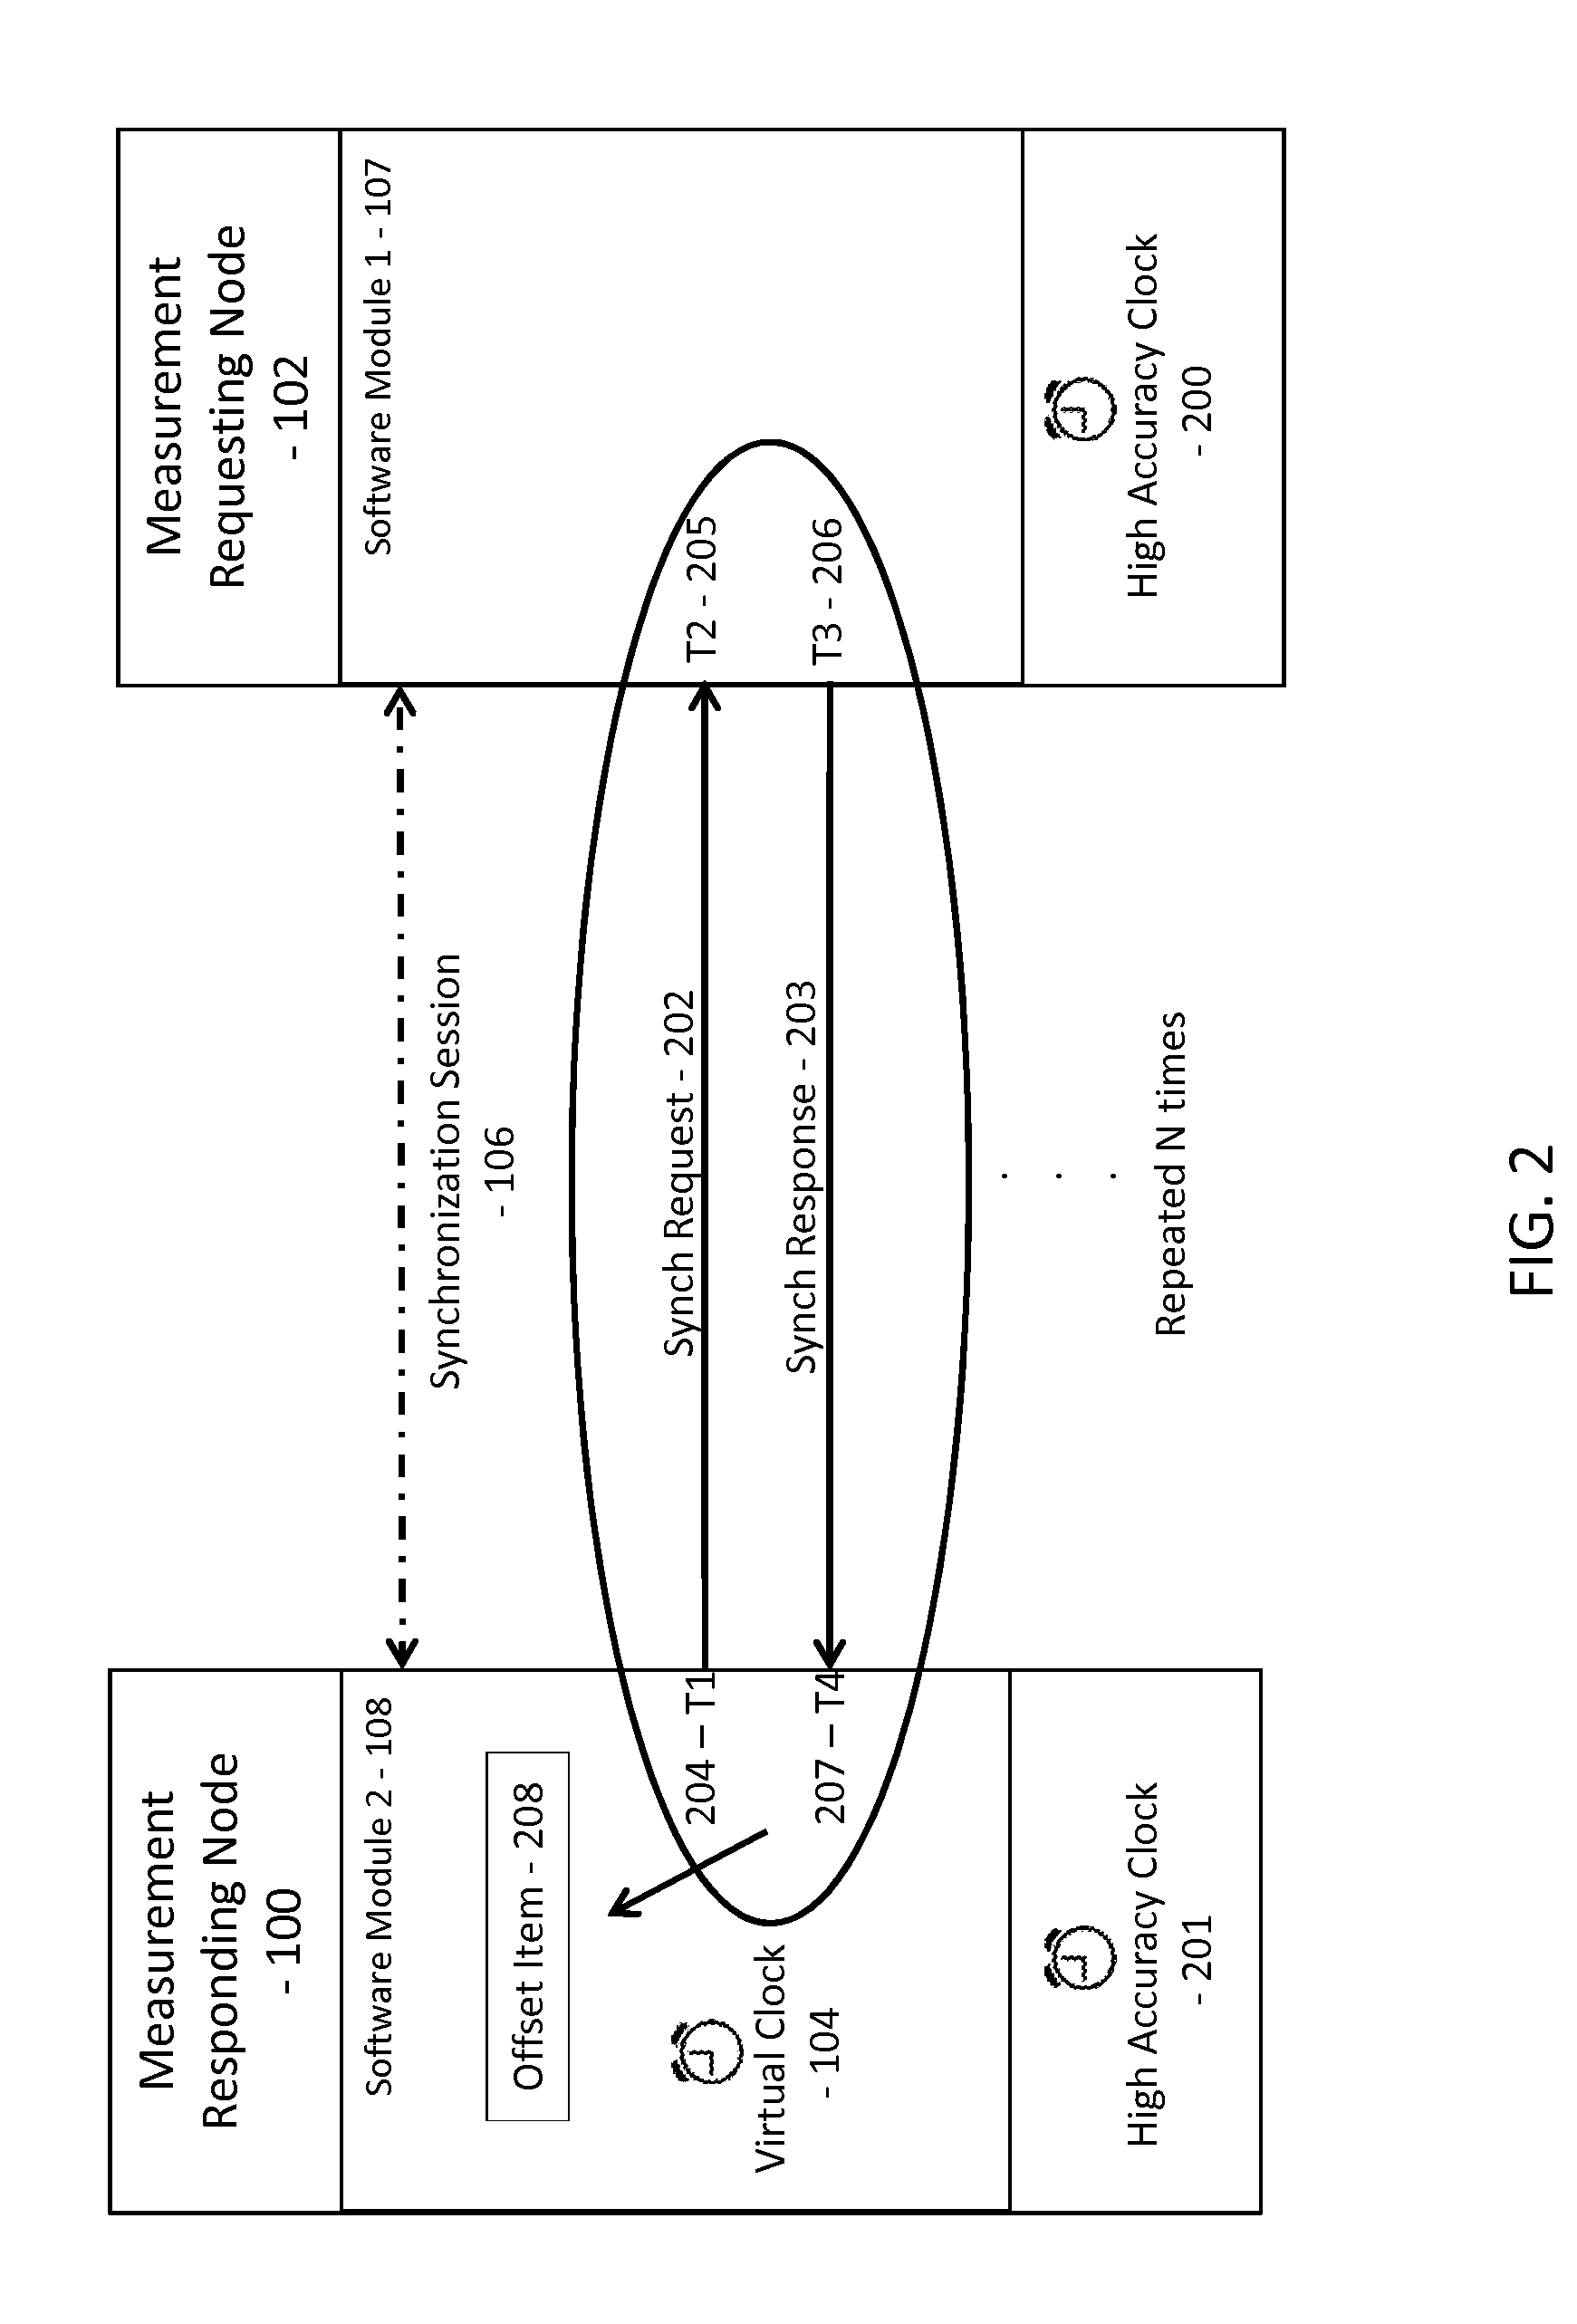 System for establishing and maintaining a clock reference indicating one-way latency in a data network